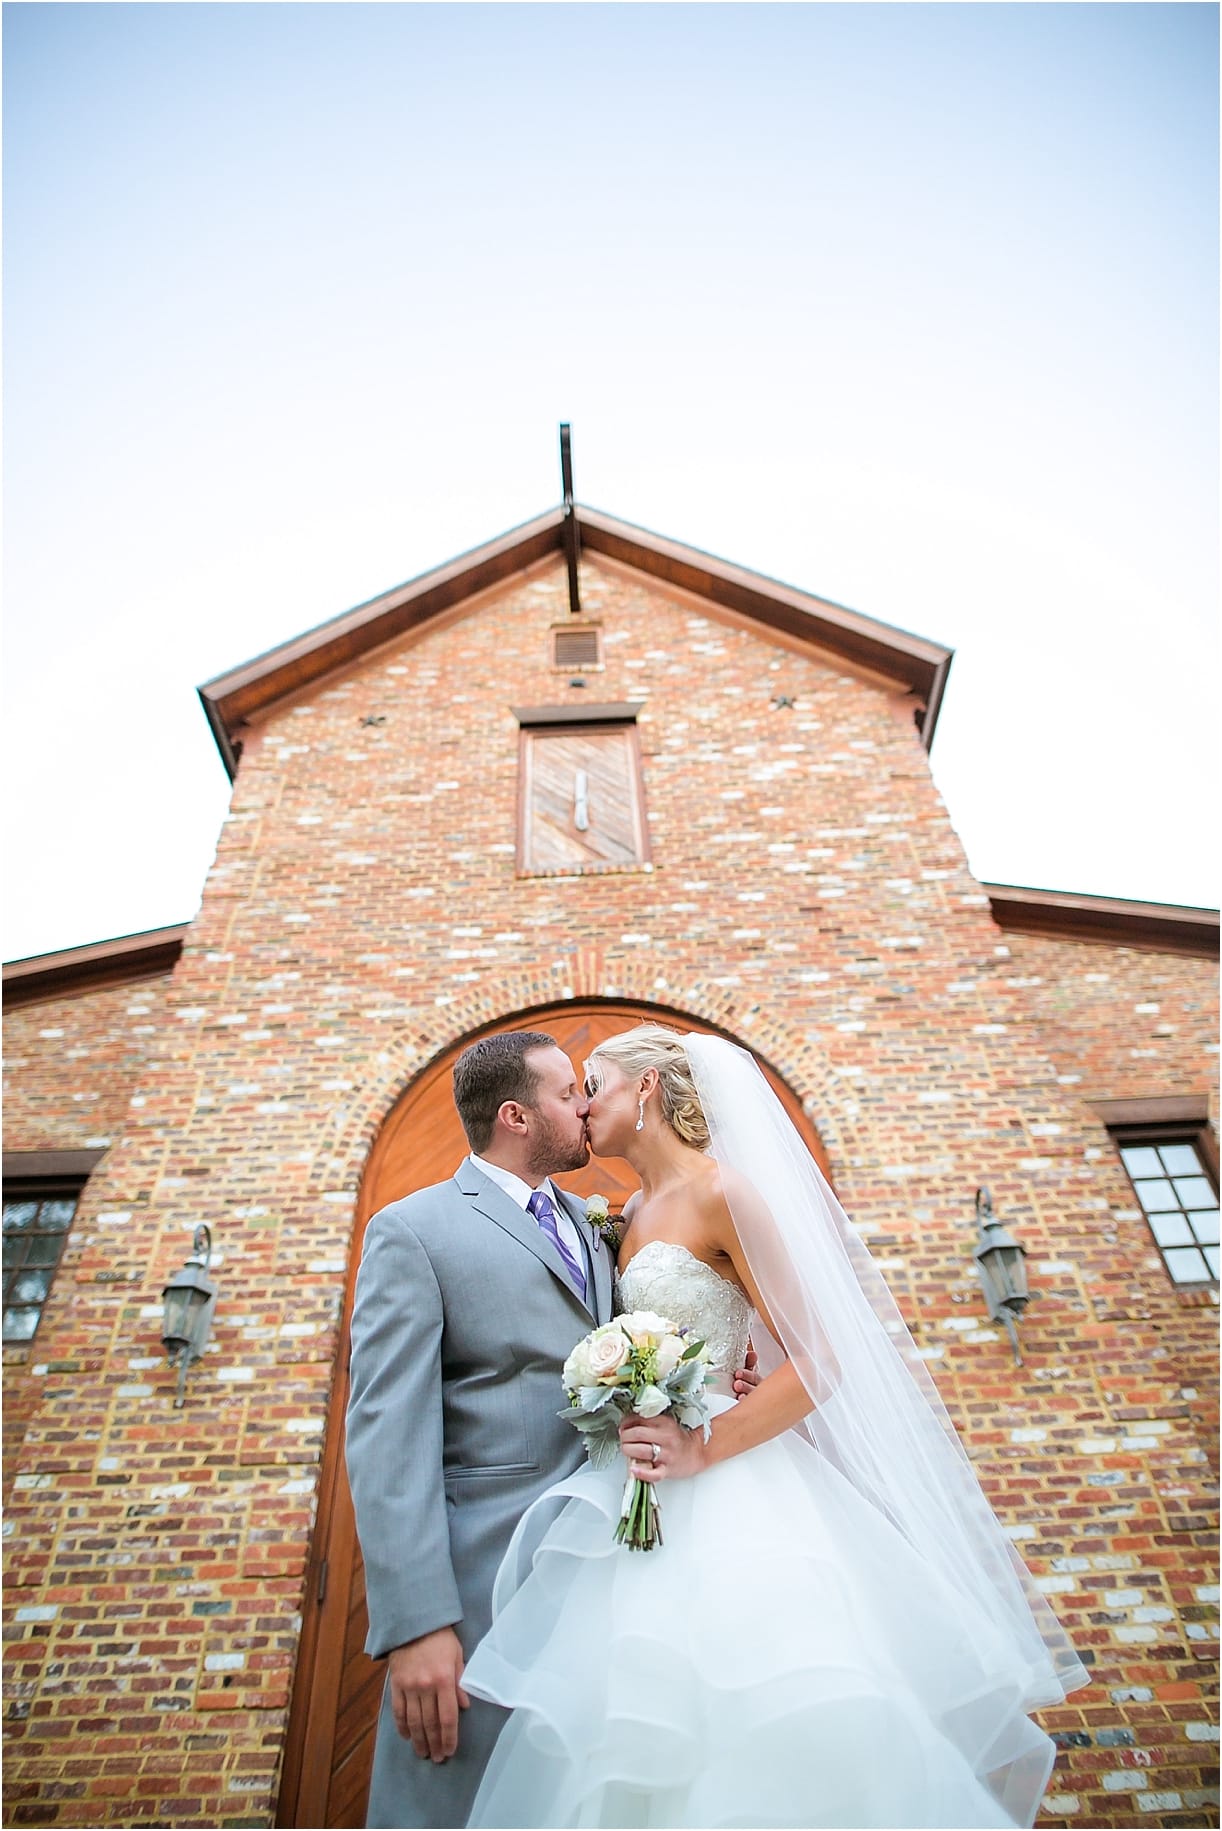 Virginia Winery Wedding at New Kent as seen on Hill City Bride Blog by Rebecca Keeling Studios - lavender, purple, outdoor